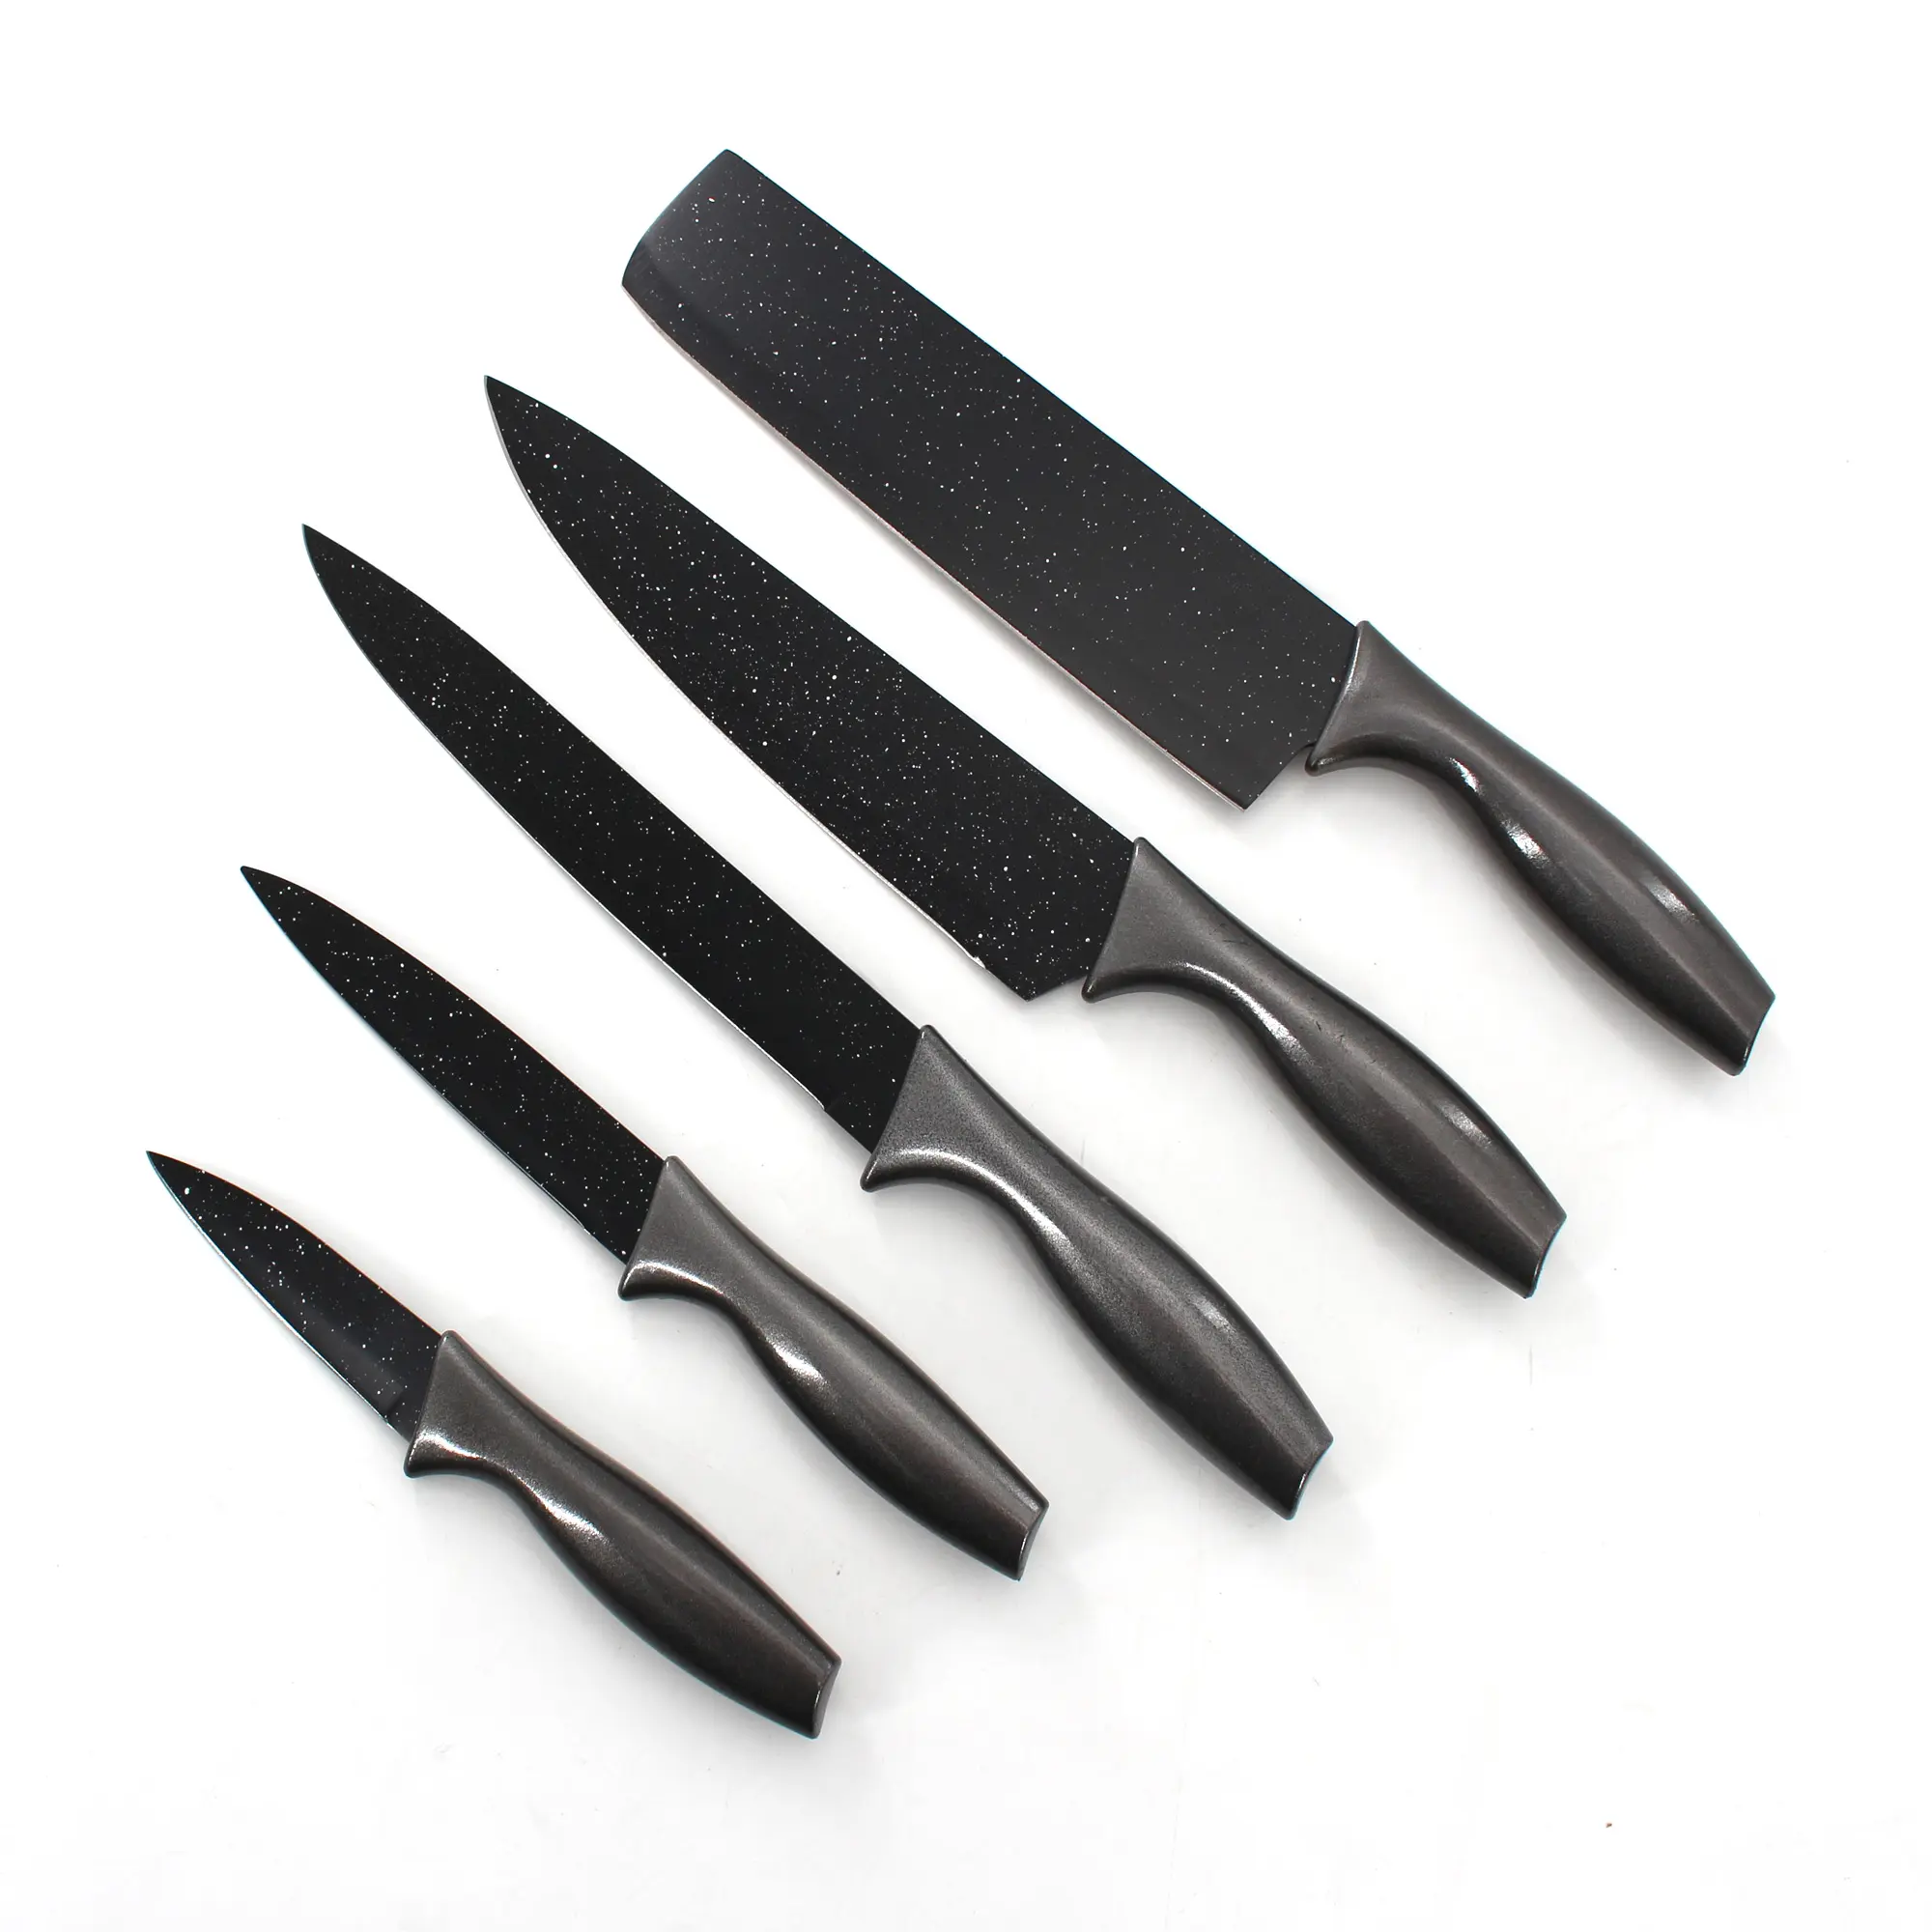 Kitchen Knife Amazon Hot Sale 5 PCS Cooking Stainless Steel Knife Chef And Japanese Knives Kitchen Knife Set With Holder